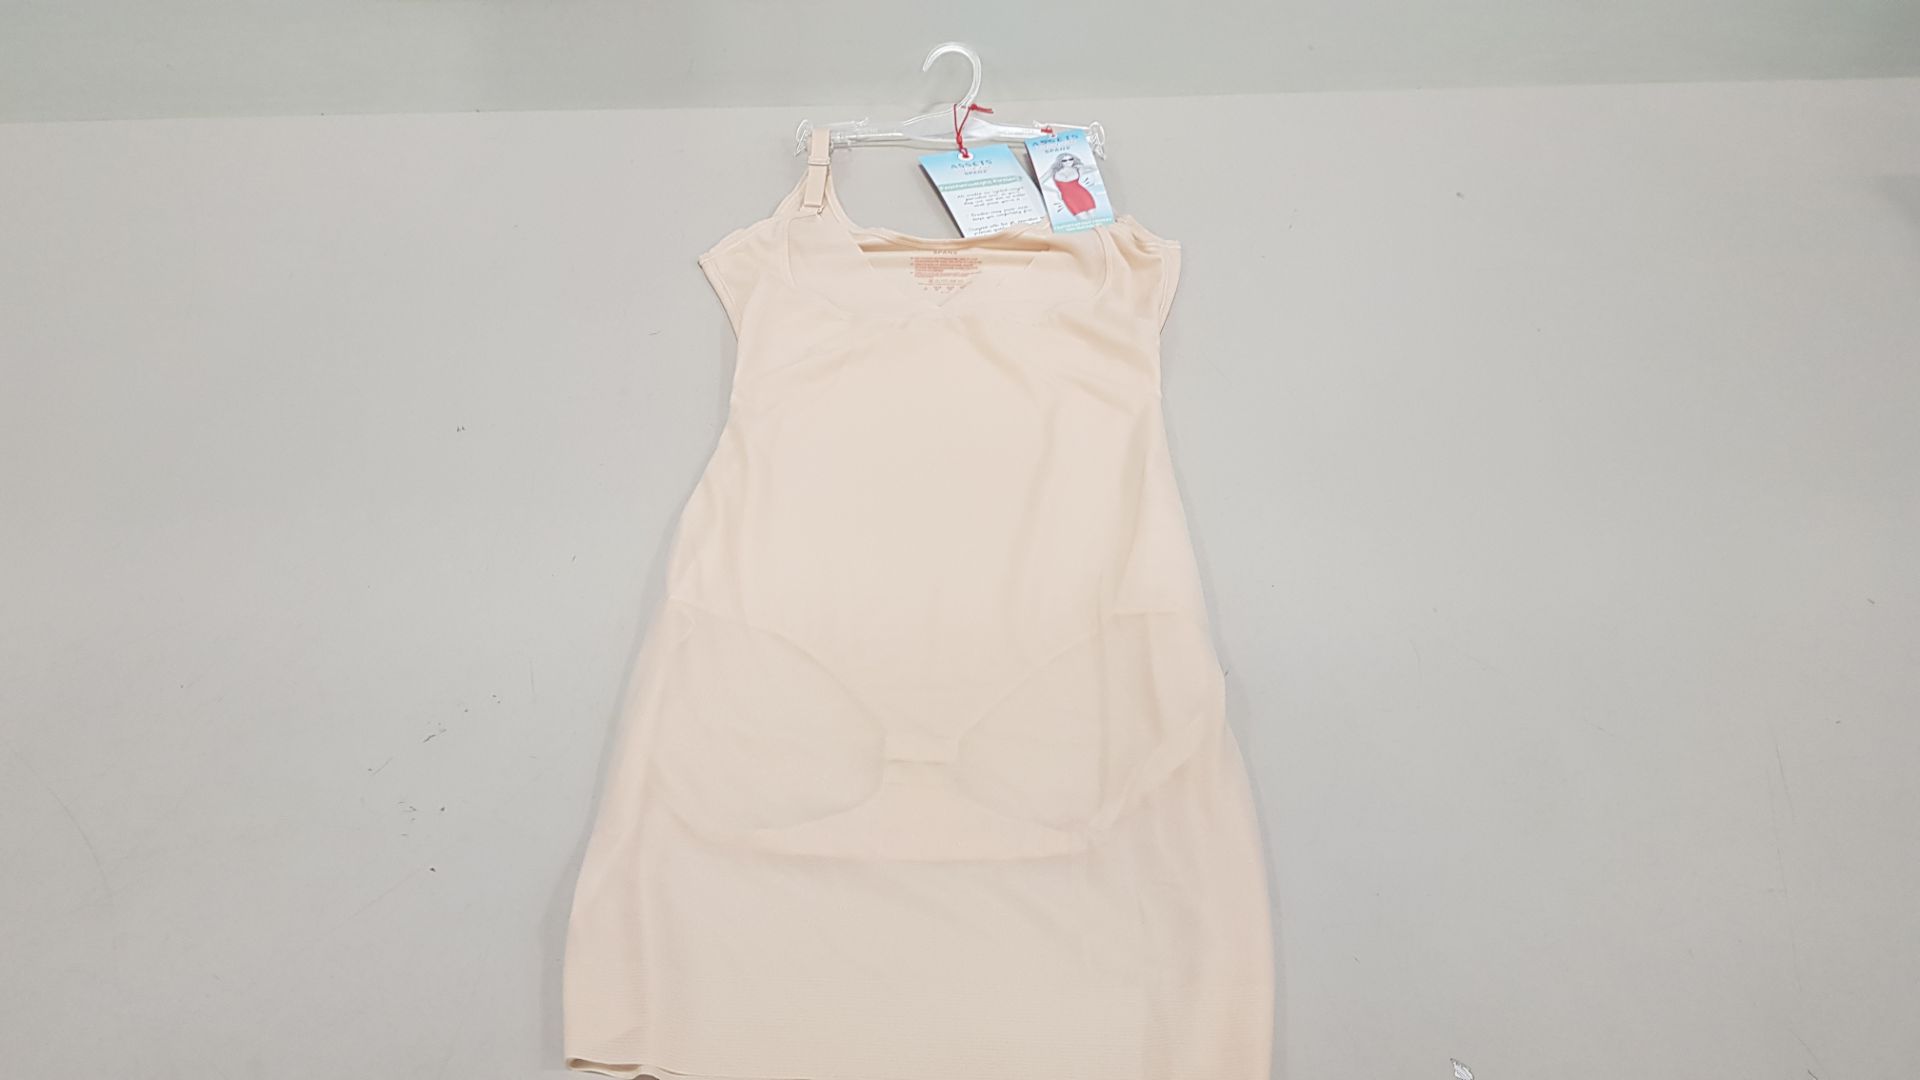 25 X BRAND NEW SPANX OPEN BUST BODY SLIP SHAPERS IN NUDE SIZE LARGE